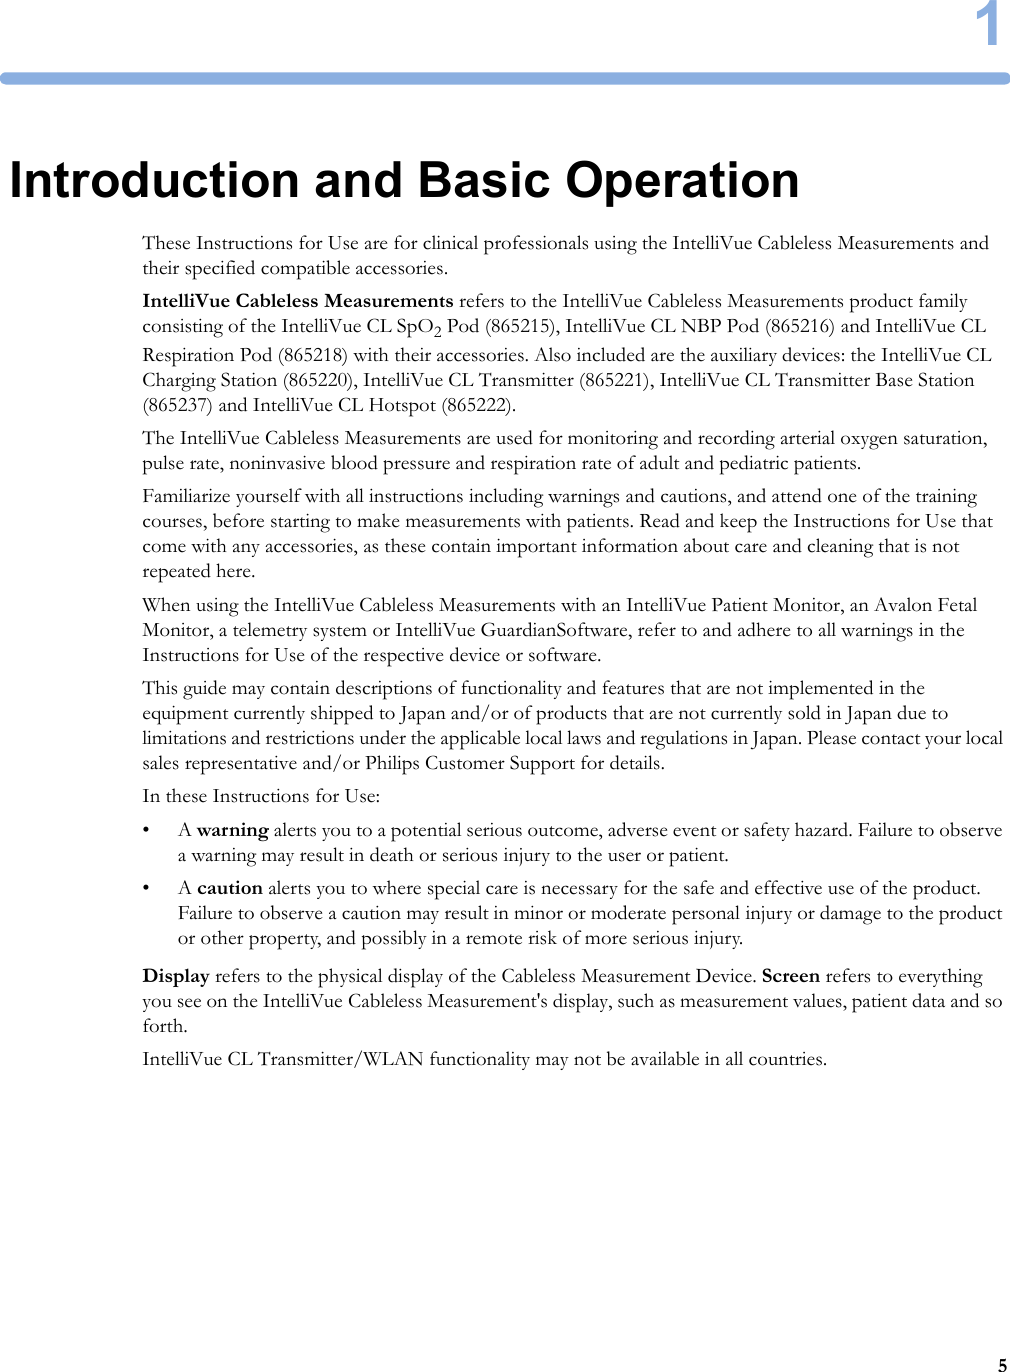 151Introduction and Basic OperationThese Instructions for Use are for clinical professionals using the IntelliVue Cableless Measurements and their specified compatible accessories.IntelliVue Cableless Measurements refers to the IntelliVue Cableless Measurements product family consisting of the IntelliVue CL SpO2 Pod (865215), IntelliVue CL NBP Pod (865216) and IntelliVue CL Respiration Pod (865218) with their accessories. Also included are the auxiliary devices: the IntelliVue CL Charging Station (865220), IntelliVue CL Transmitter (865221), IntelliVue CL Transmitter Base Station (865237) and IntelliVue CL Hotspot (865222).The IntelliVue Cableless Measurements are used for monitoring and recording arterial oxygen saturation, pulse rate, noninvasive blood pressure and respiration rate of adult and pediatric patients.Familiarize yourself with all instructions including warnings and cautions, and attend one of the training courses, before starting to make measurements with patients. Read and keep the Instructions for Use that come with any accessories, as these contain important information about care and cleaning that is not repeated here.When using the IntelliVue Cableless Measurements with an IntelliVue Patient Monitor, an Avalon Fetal Monitor, a telemetry system or IntelliVue GuardianSoftware, refer to and adhere to all warnings in the Instructions for Use of the respective device or software.This guide may contain descriptions of functionality and features that are not implemented in the equipment currently shipped to Japan and/or of products that are not currently sold in Japan due to limitations and restrictions under the applicable local laws and regulations in Japan. Please contact your local sales representative and/or Philips Customer Support for details.In these Instructions for Use:•A warning alerts you to a potential serious outcome, adverse event or safety hazard. Failure to observe a warning may result in death or serious injury to the user or patient.•A caution alerts you to where special care is necessary for the safe and effective use of the product. Failure to observe a caution may result in minor or moderate personal injury or damage to the product or other property, and possibly in a remote risk of more serious injury.Display refers to the physical display of the Cableless Measurement Device. Screen refers to everything you see on the IntelliVue Cableless Measurement&apos;s display, such as measurement values, patient data and so forth.IntelliVue CL Transmitter/WLAN functionality may not be available in all countries.